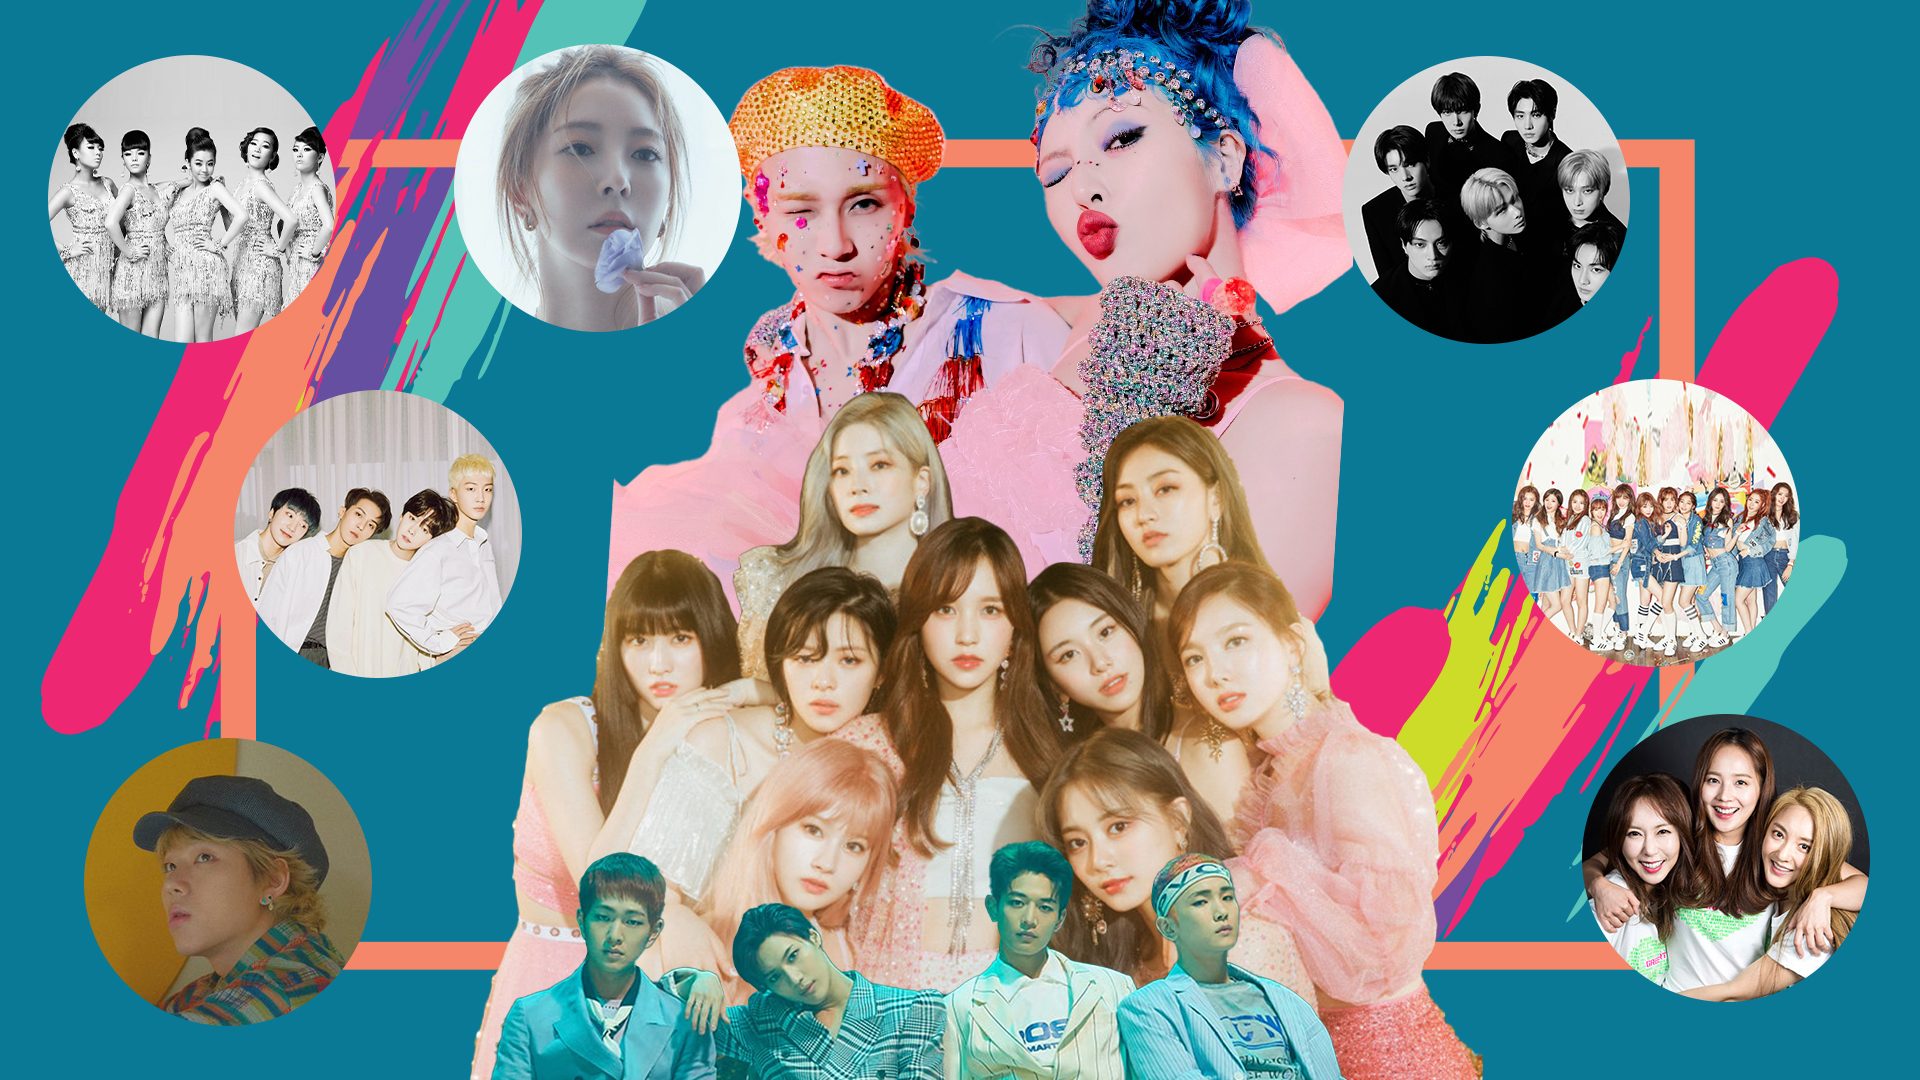 Biases, comebacks, fan chants: A beginner's guide to the K-pop